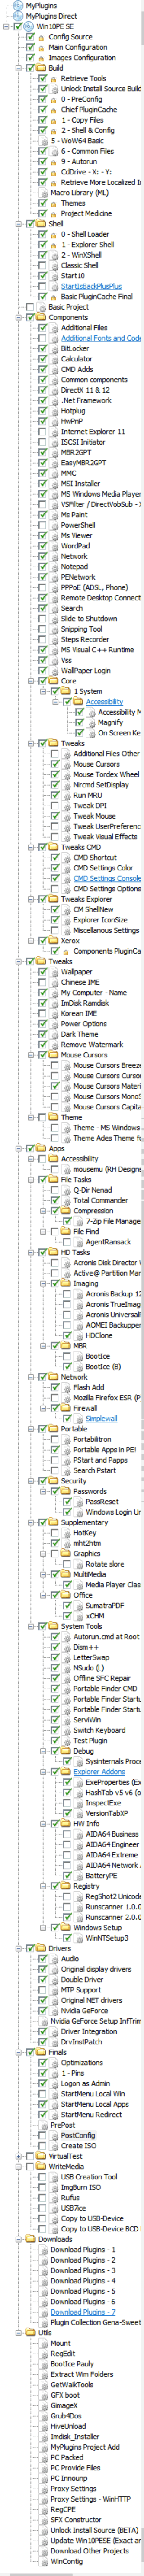 A typical WinBuilder PE project tree. Every single box checked are settings made before running the scripts.